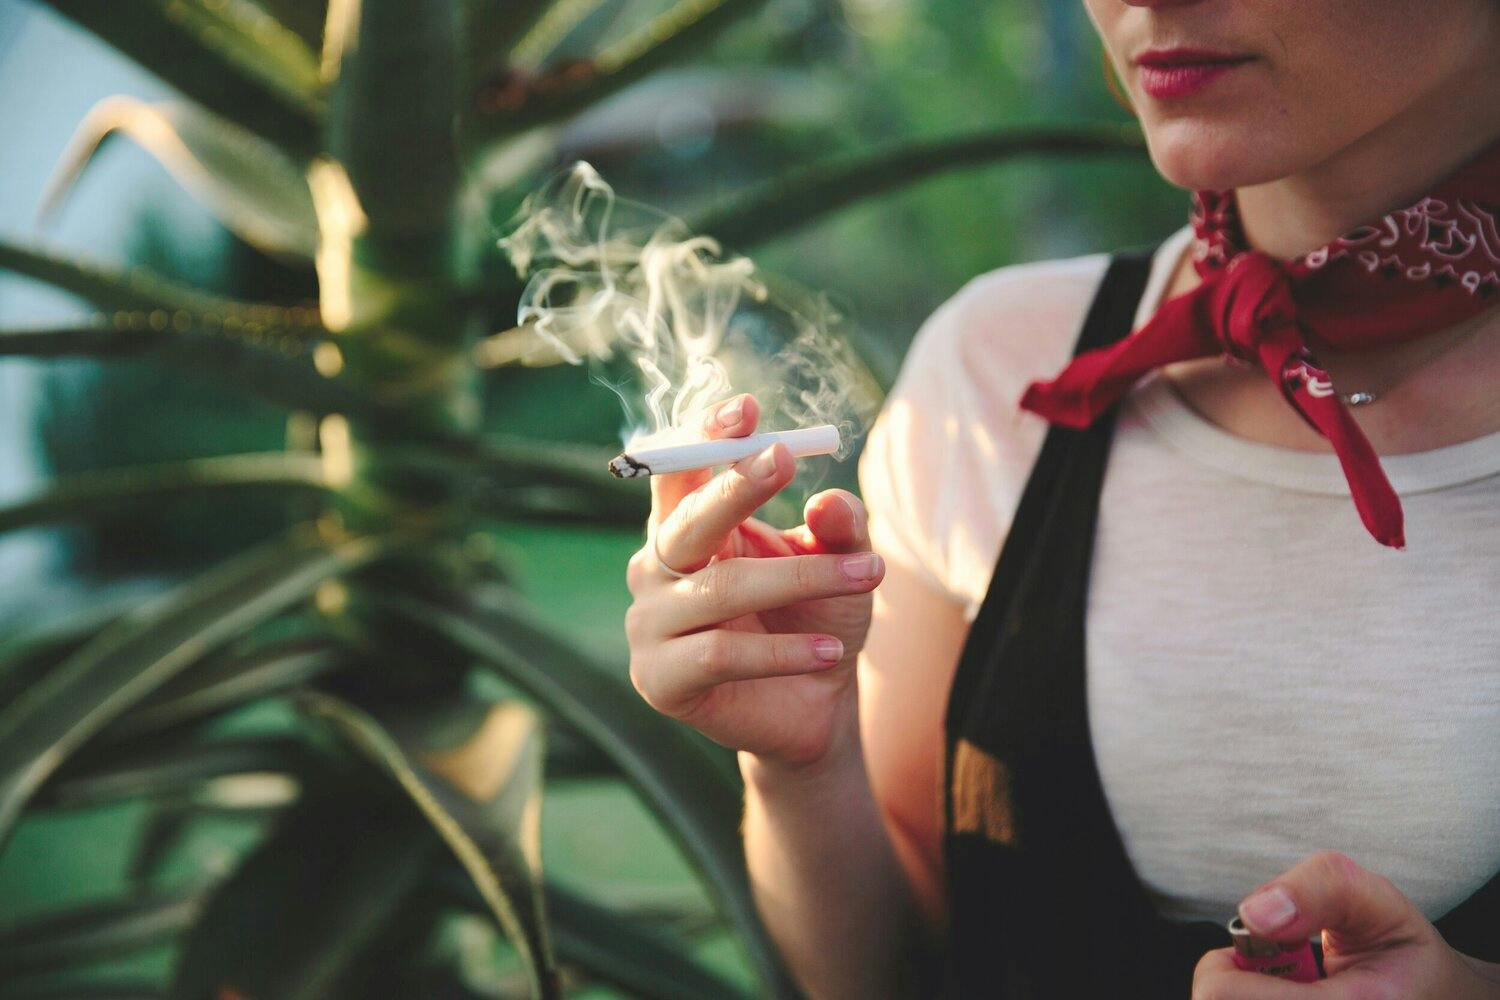 A woman in a red scarf holding a lit marijuana cigarette.